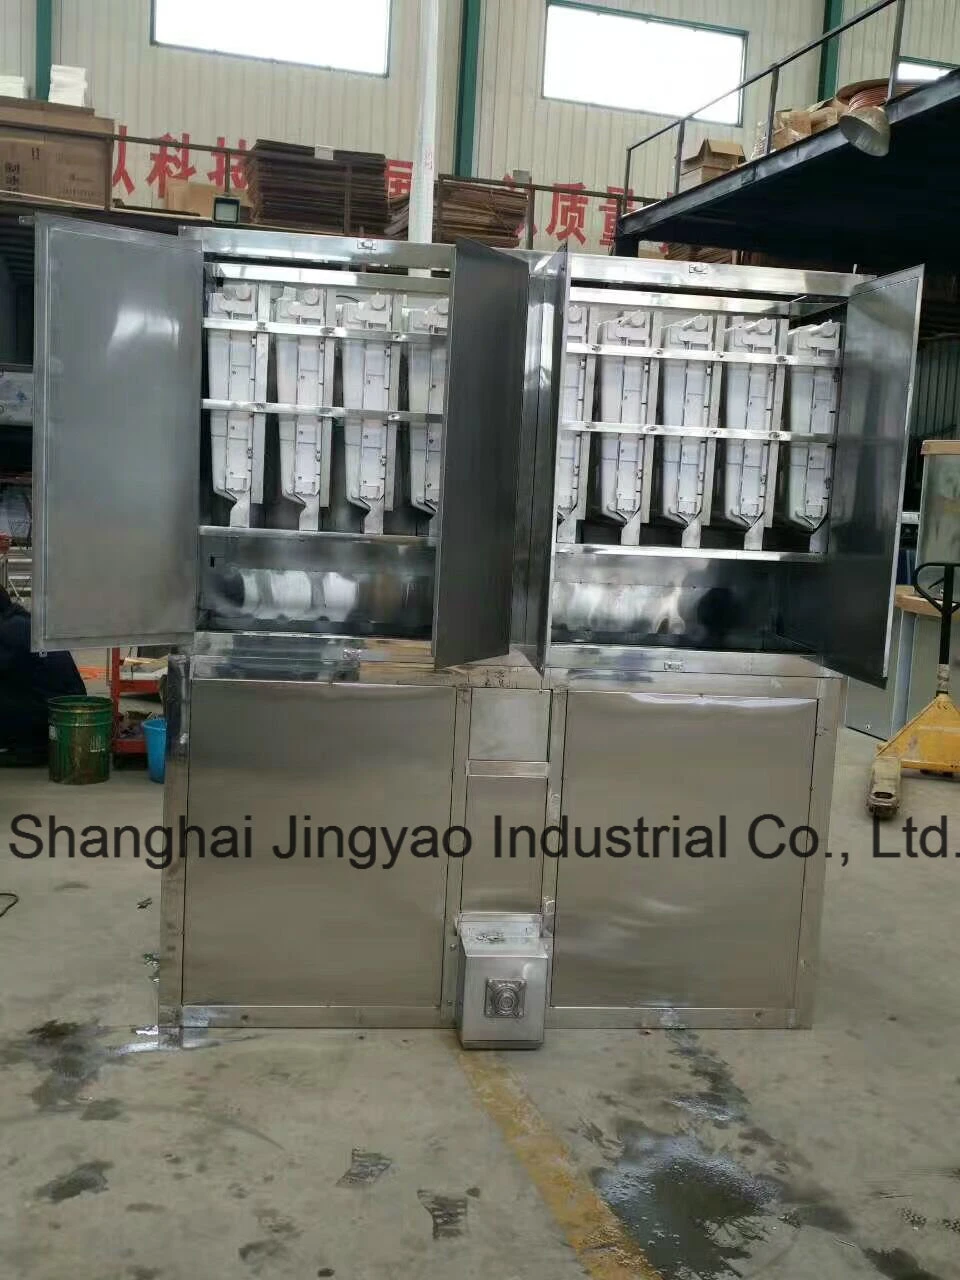 China Manufacturer Supplier Big Capacity Ice Cube Making Machine for Cold Drinking/Salad Ice Making Machine for Sale/China Suppliers Cube Ice Making Machine